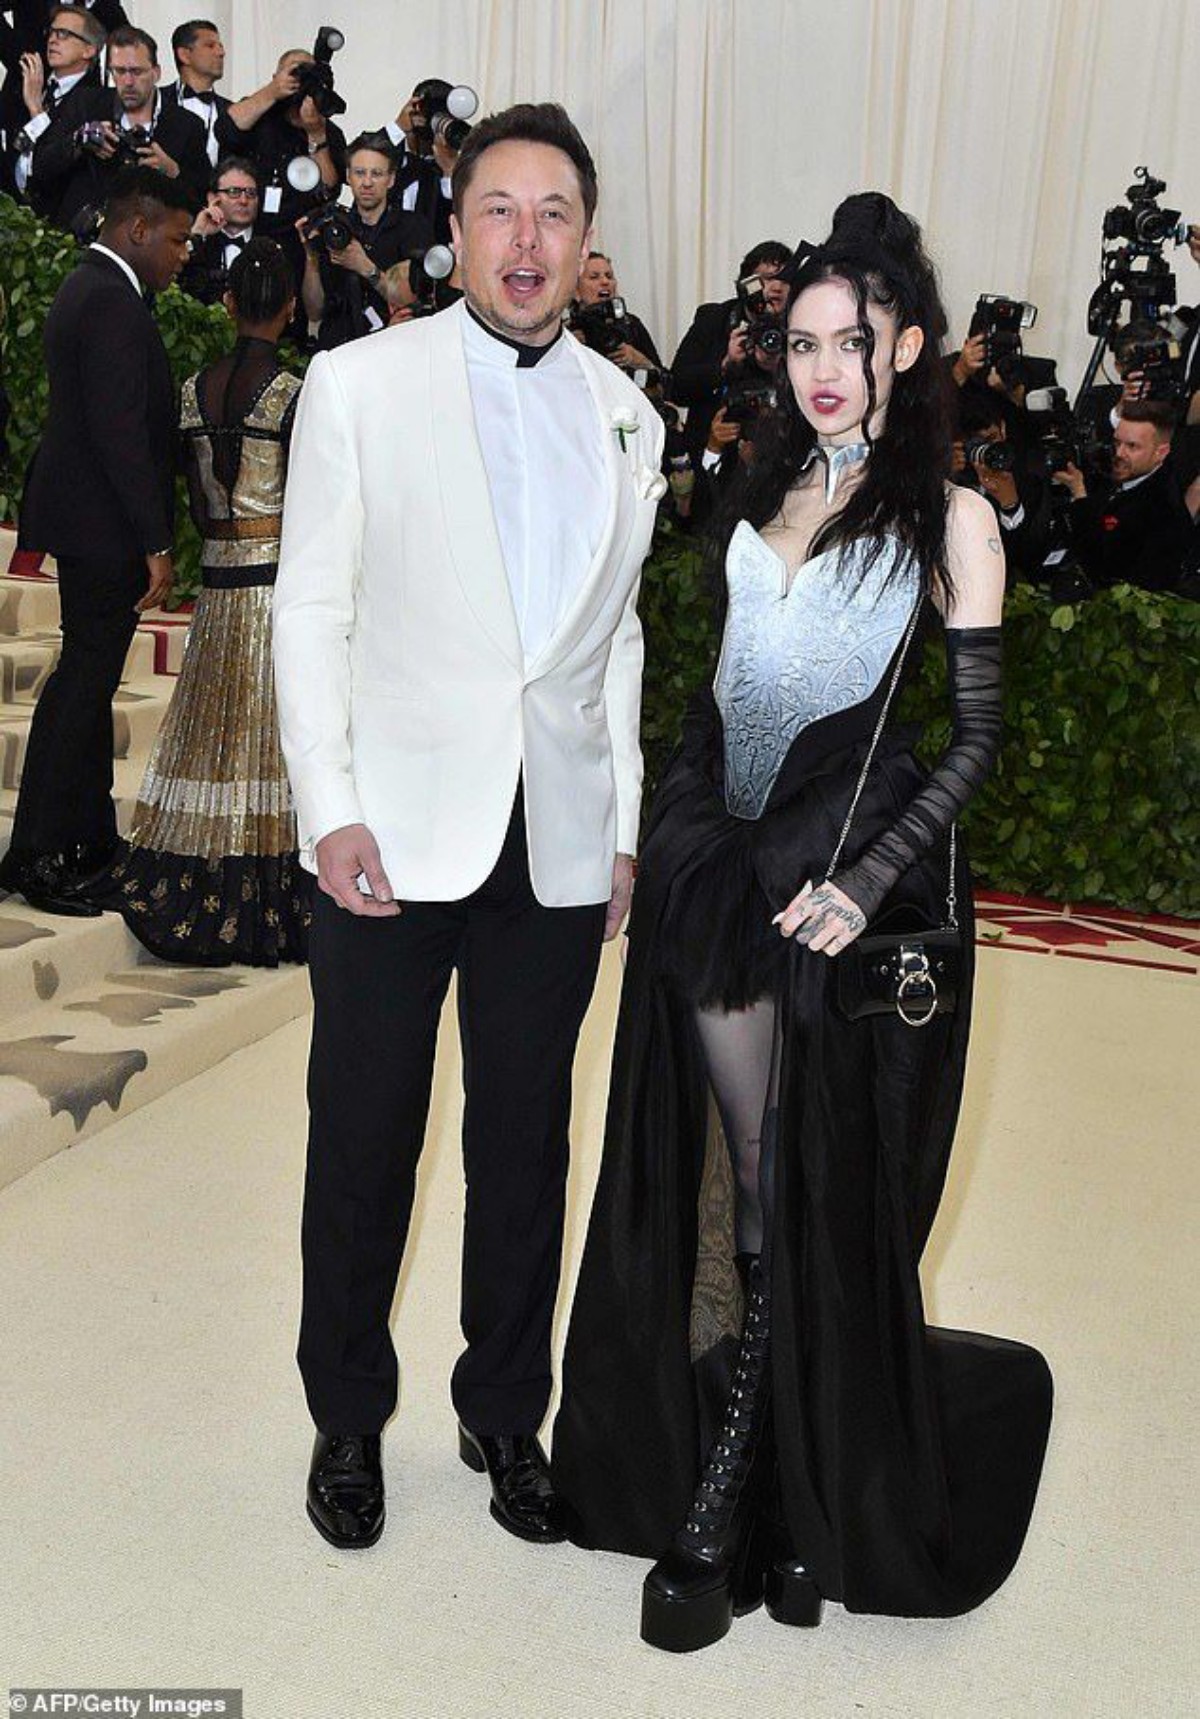 Check Out The Confusing Meaning Of Elon Musk & Grimes' Children's Names